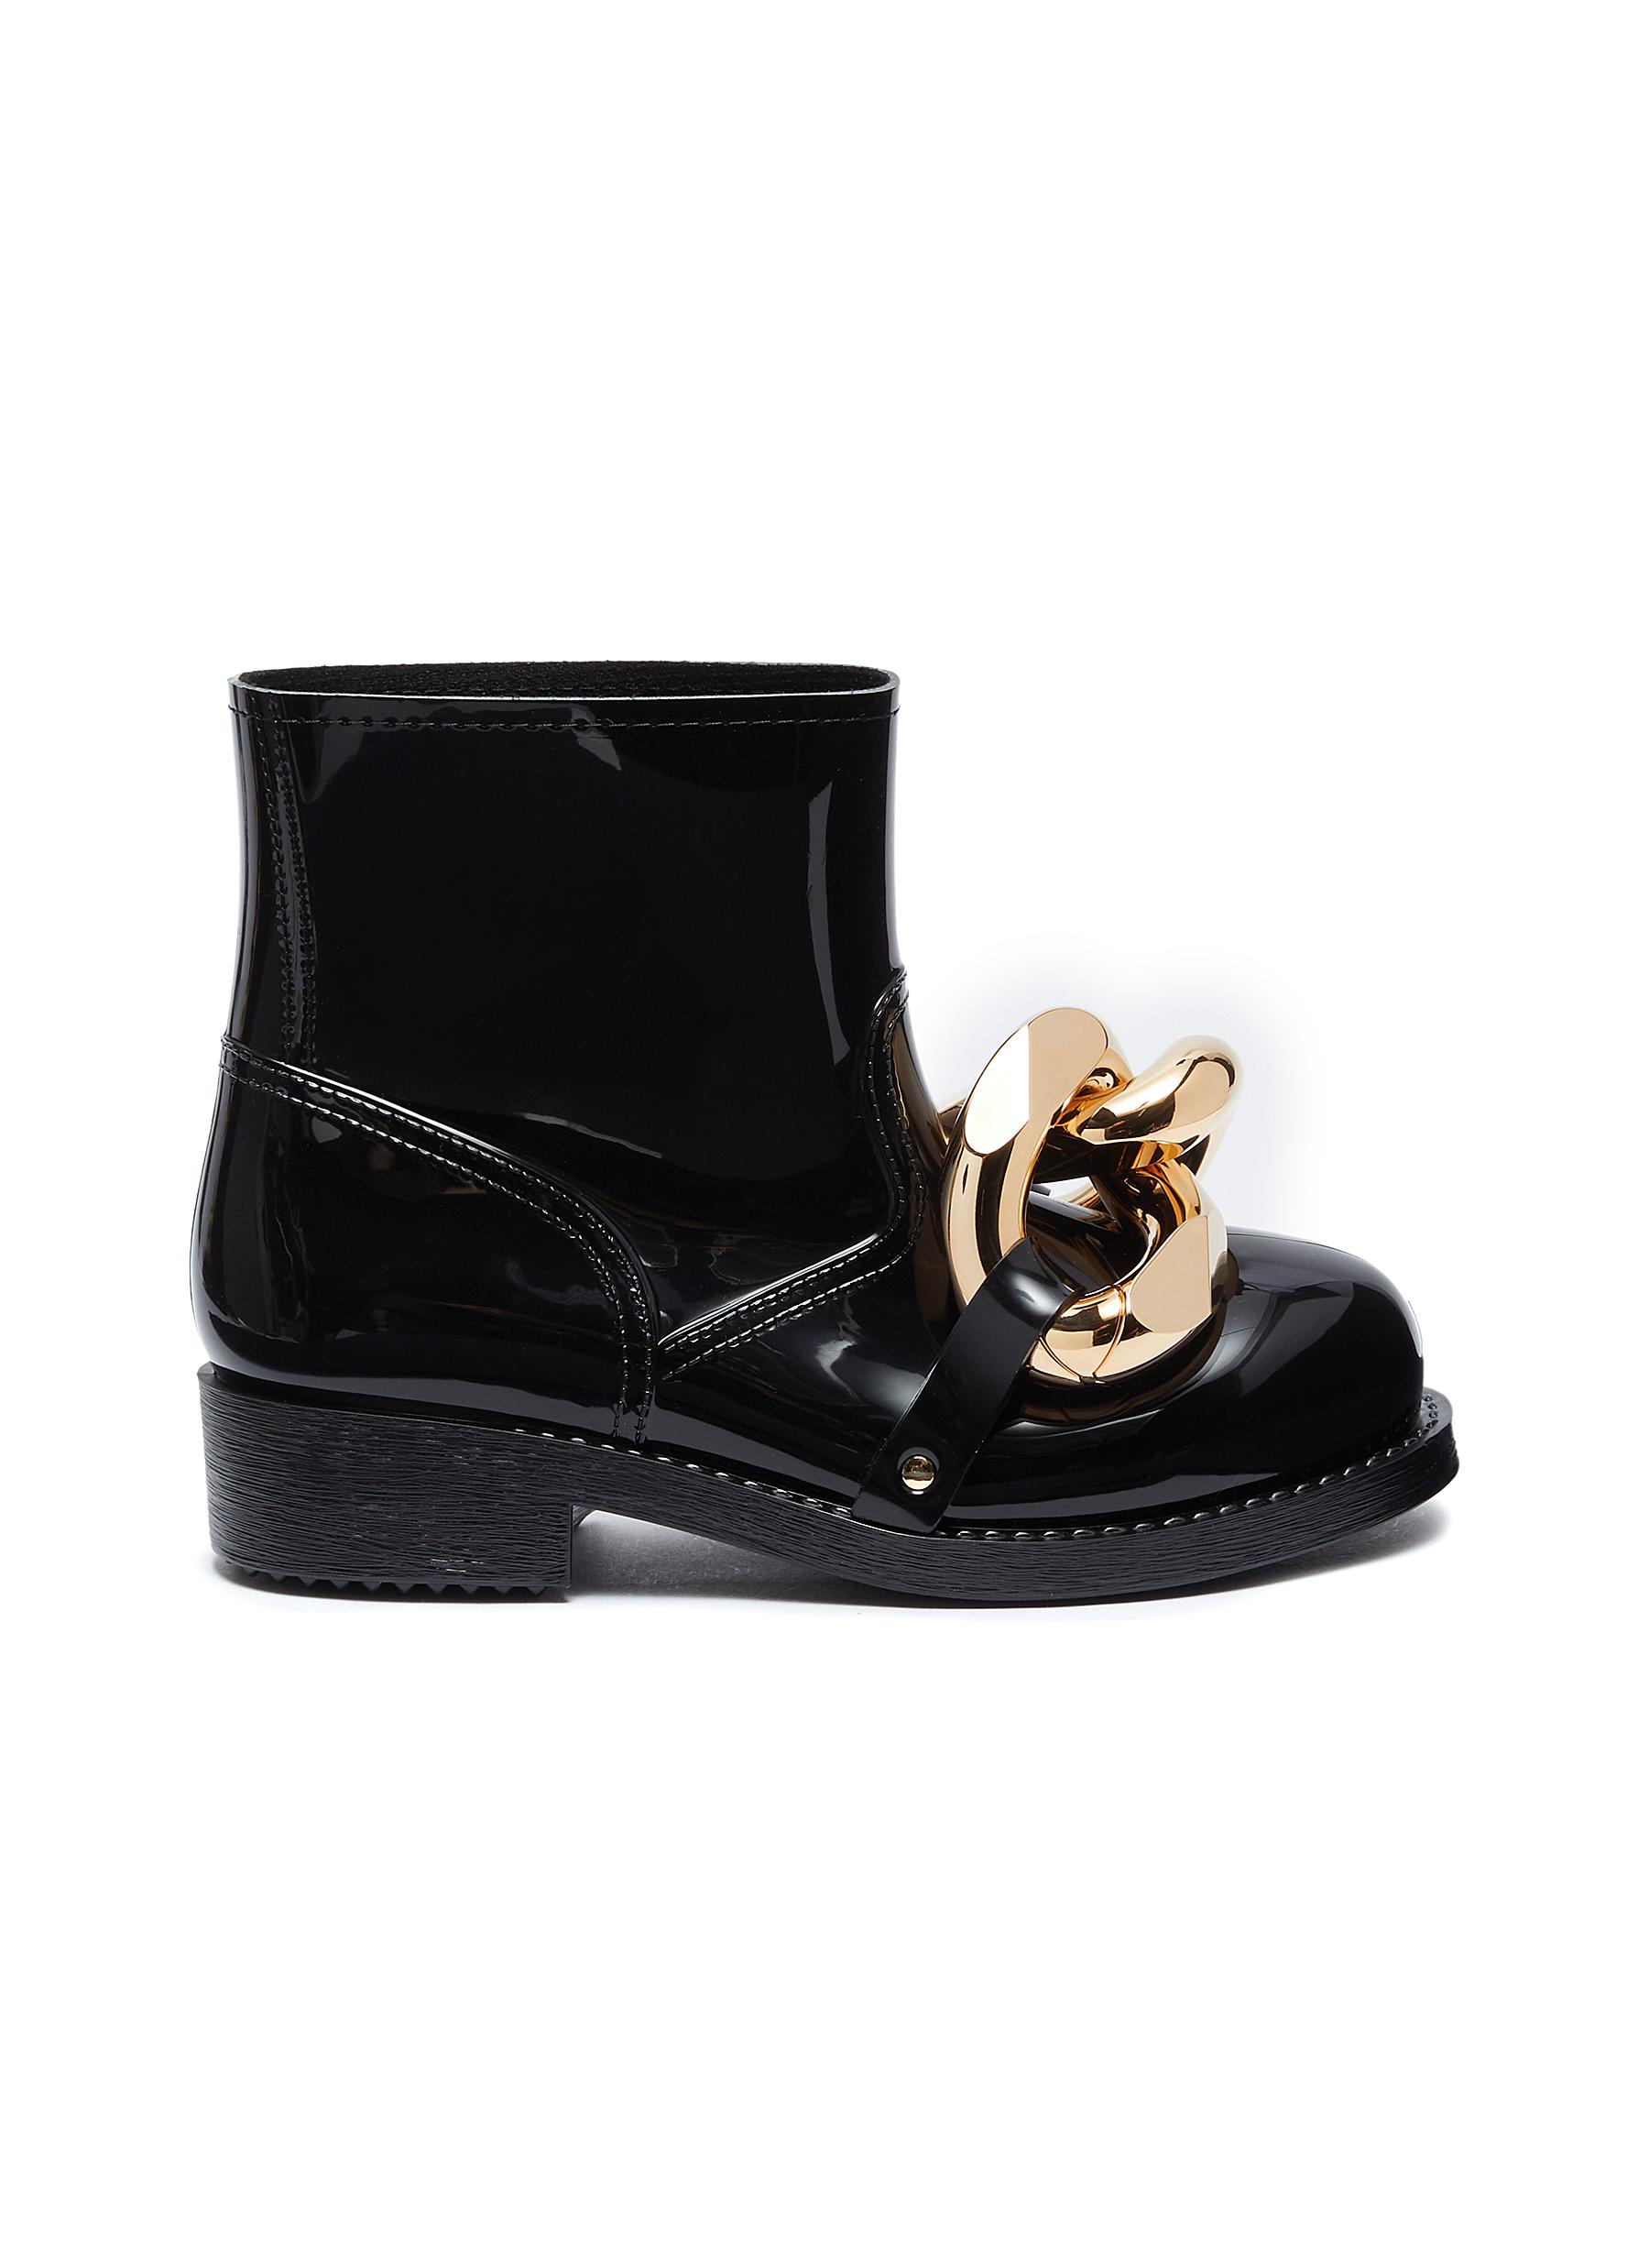 JW ANDERSON | Chain Rubber Boots | Women | Lane Crawford